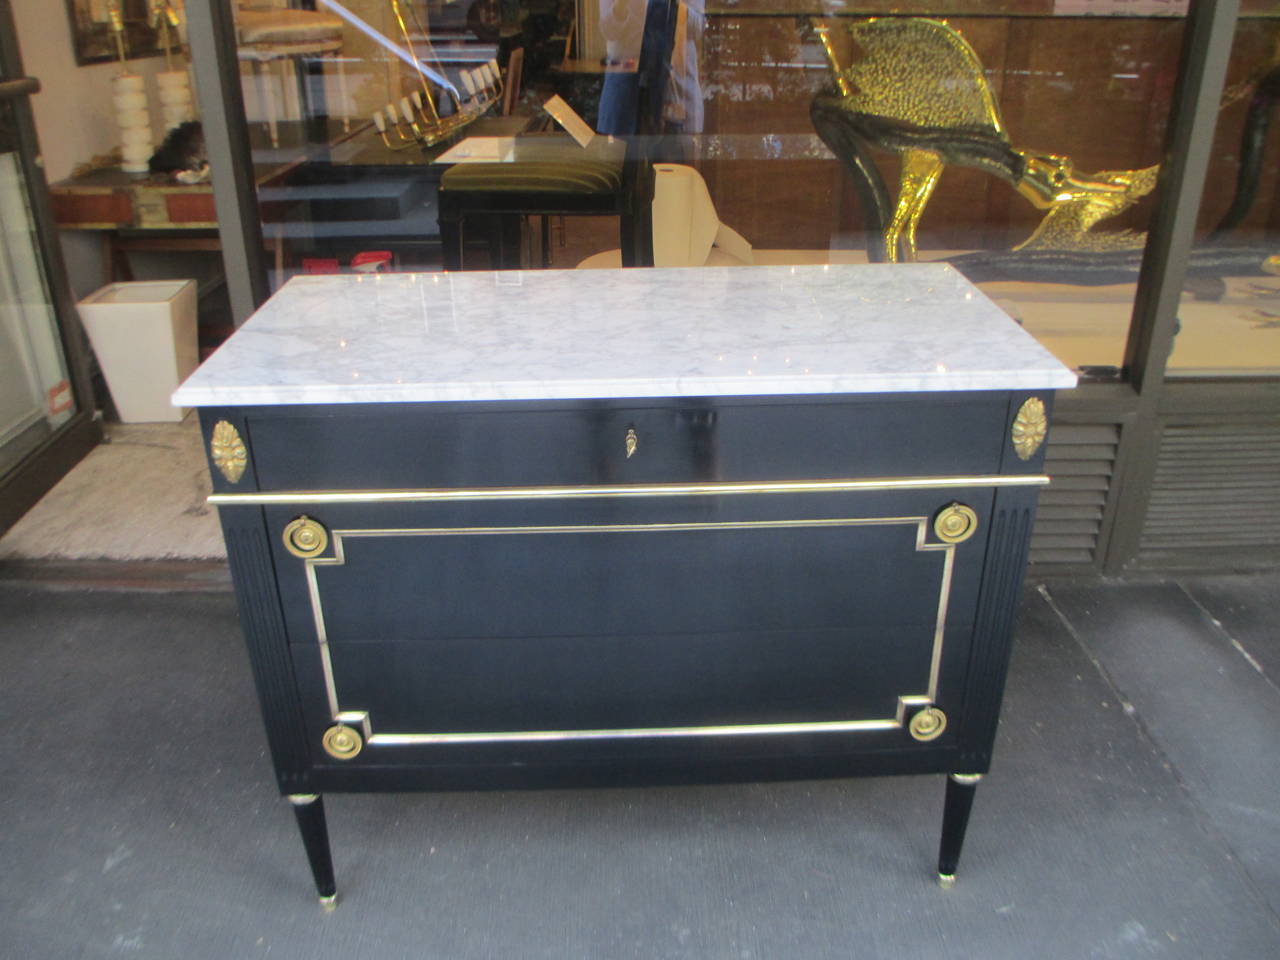 Exquisite Directoire-Style Marble-Top Commode with Applied Bronze, featuring three drawers, attributed to Maison Jansen